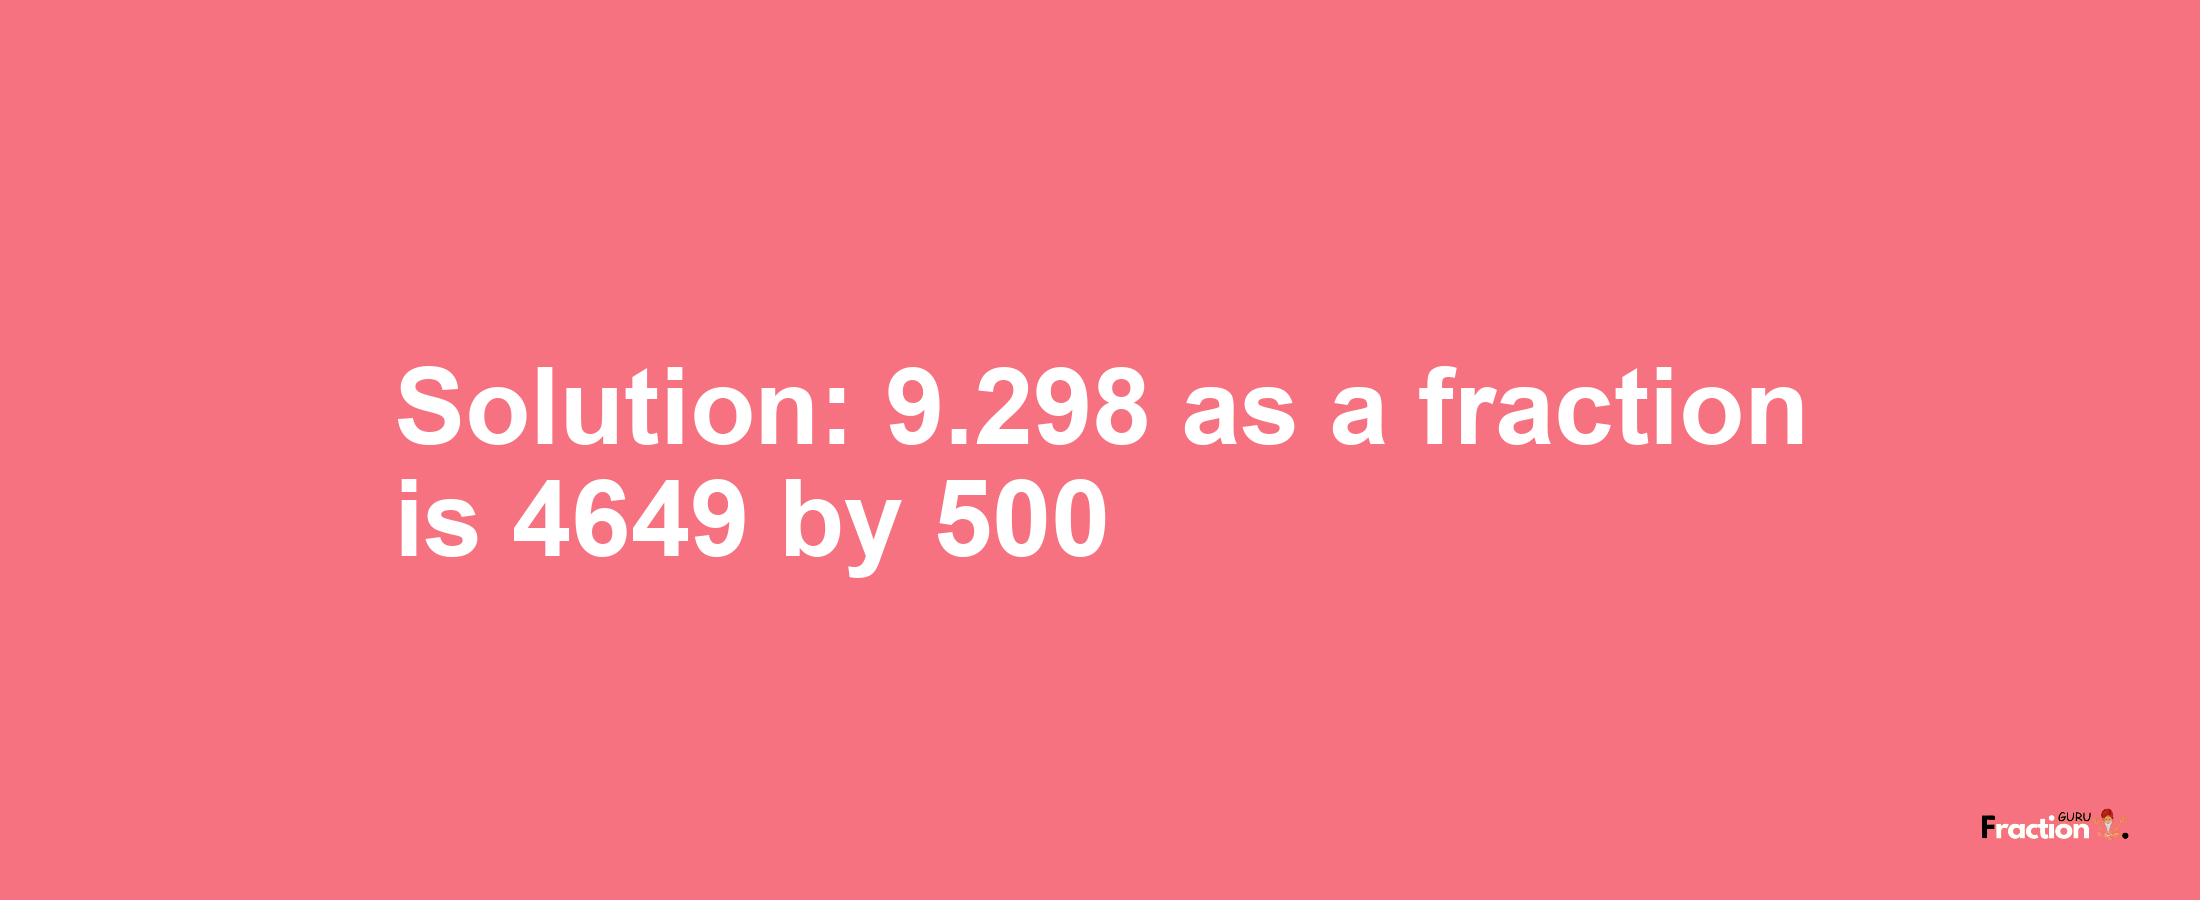 Solution:9.298 as a fraction is 4649/500